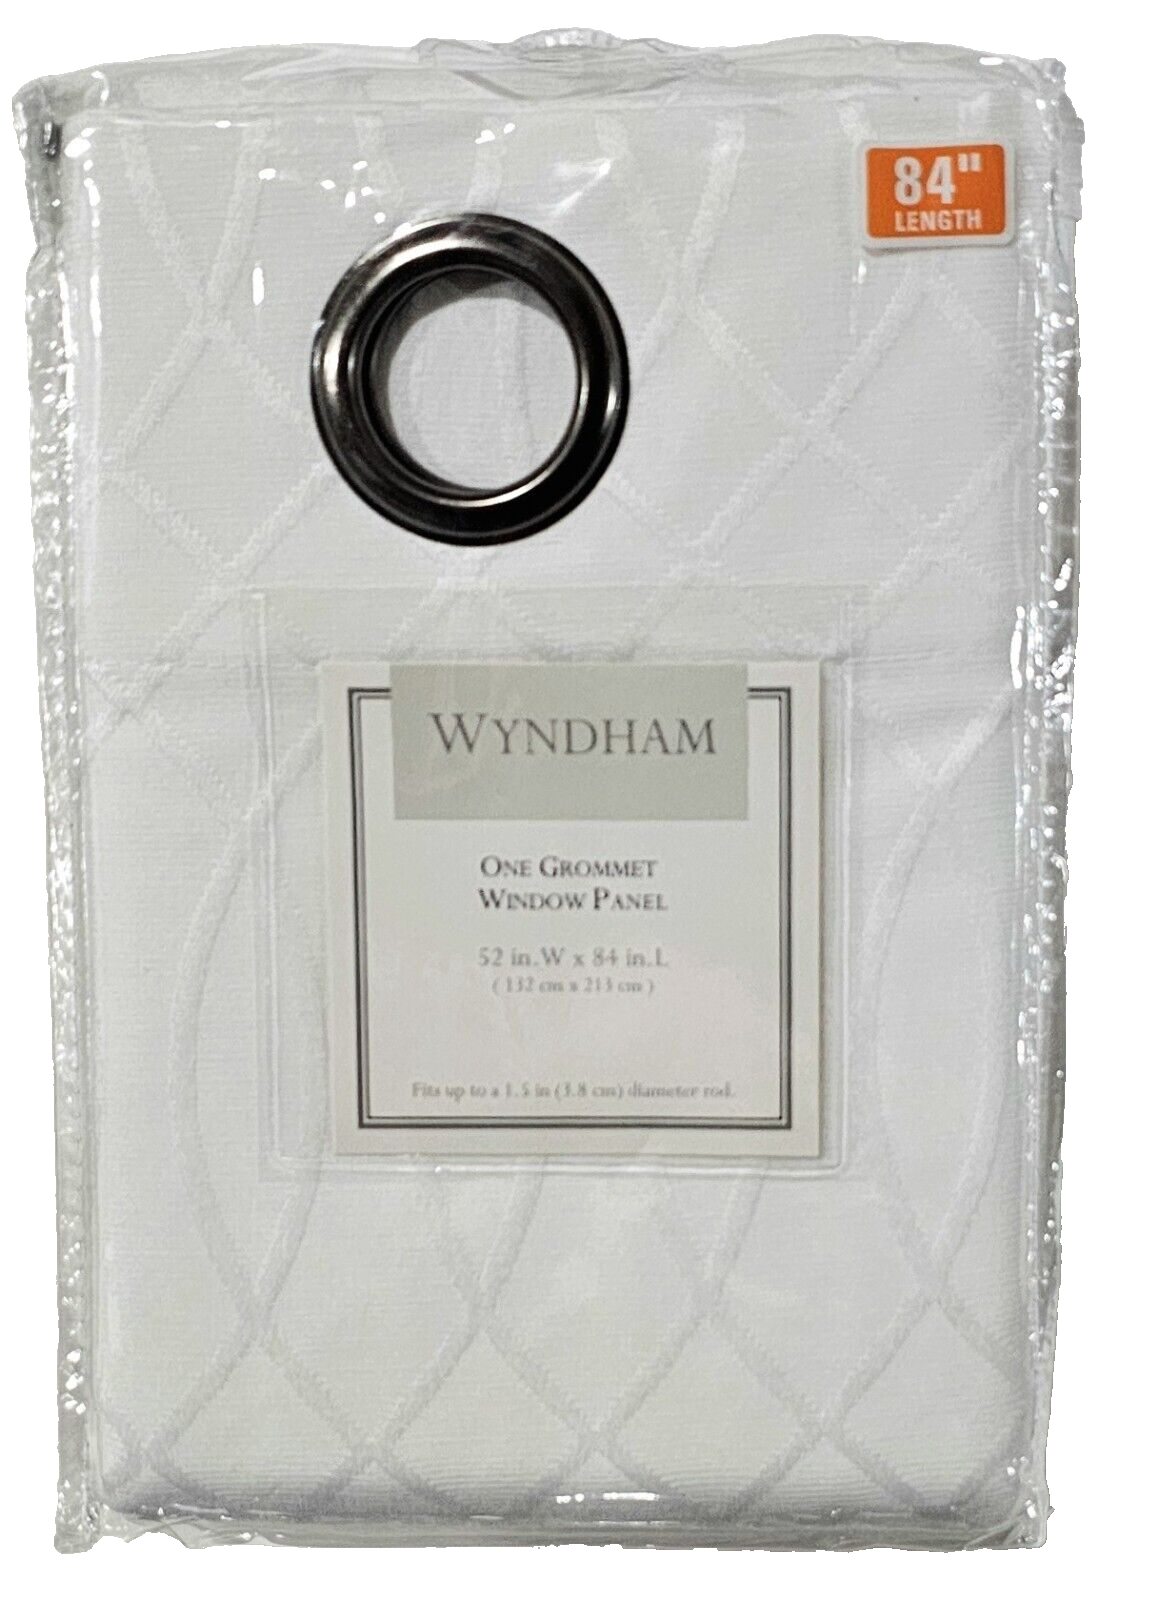 Primary image for Wyndham One Grommet Window Panel 52x84in Fits 1.5in Rod Snow White Polyester